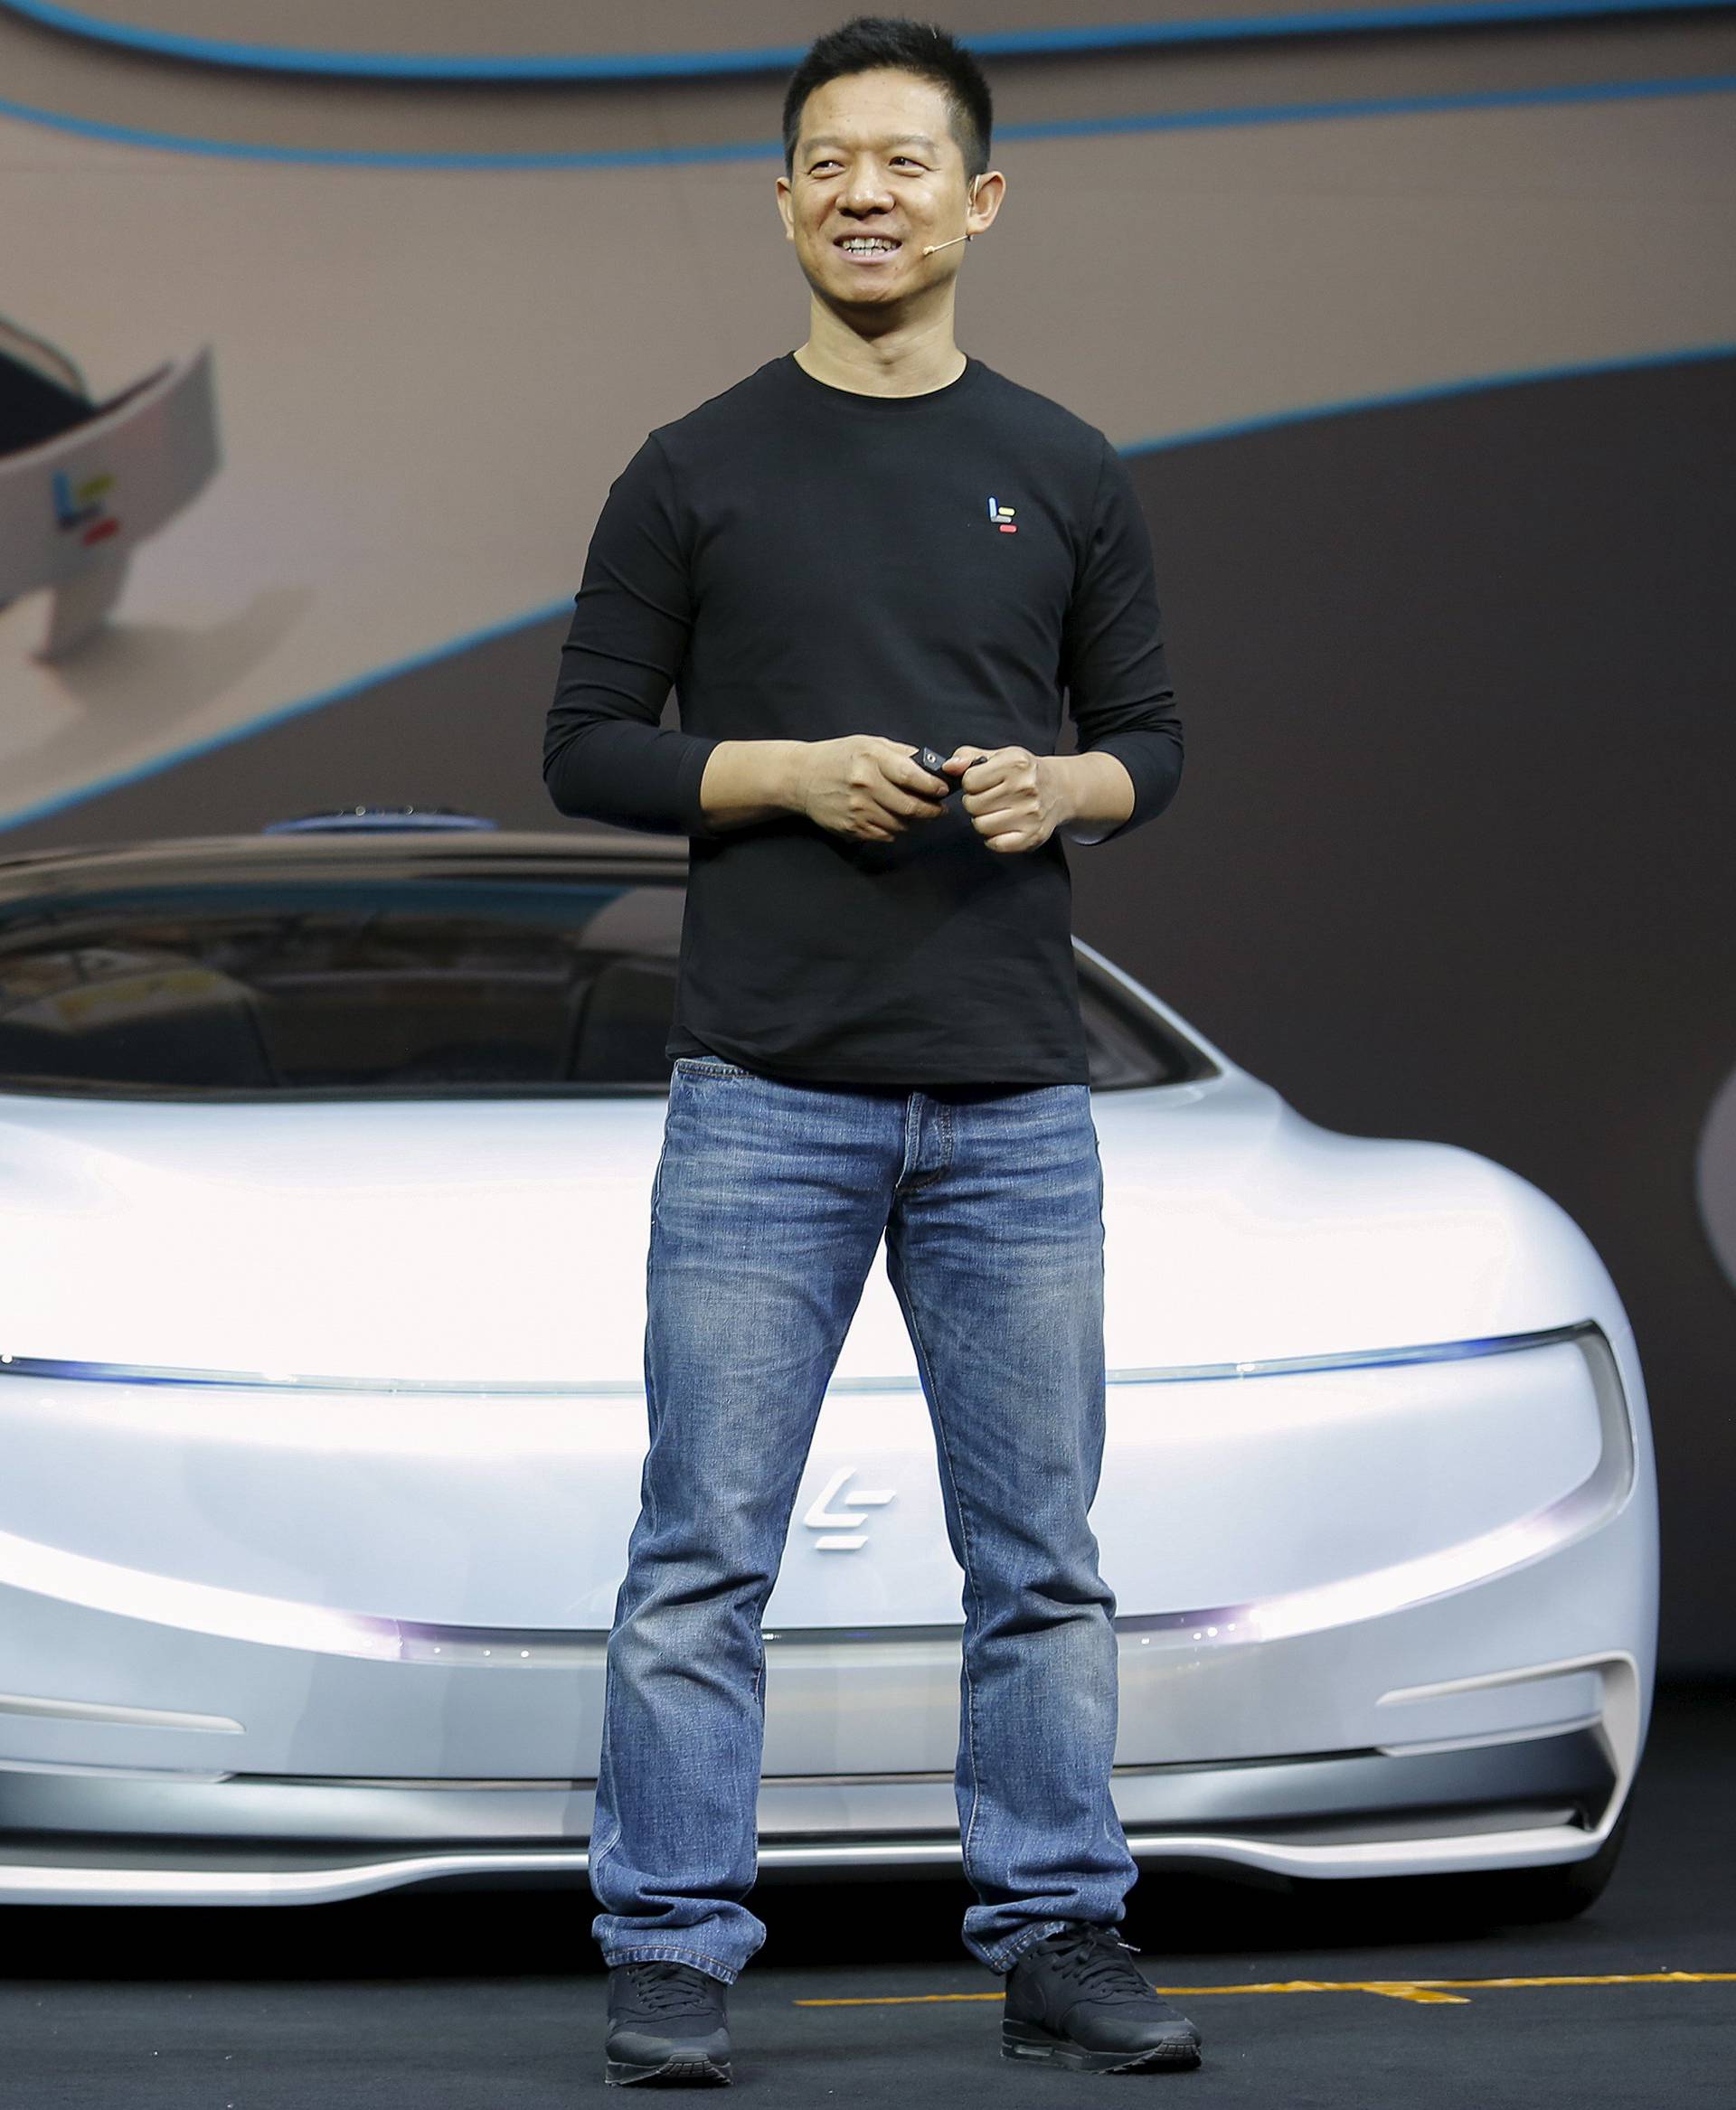 Jia Yueting, co-founder and head of Le Holdings Co Ltd, also known as LeEco and formerly as LeTV, unveils an all-electric battery "concept" car called LeSEE during a ceremony in Beijing